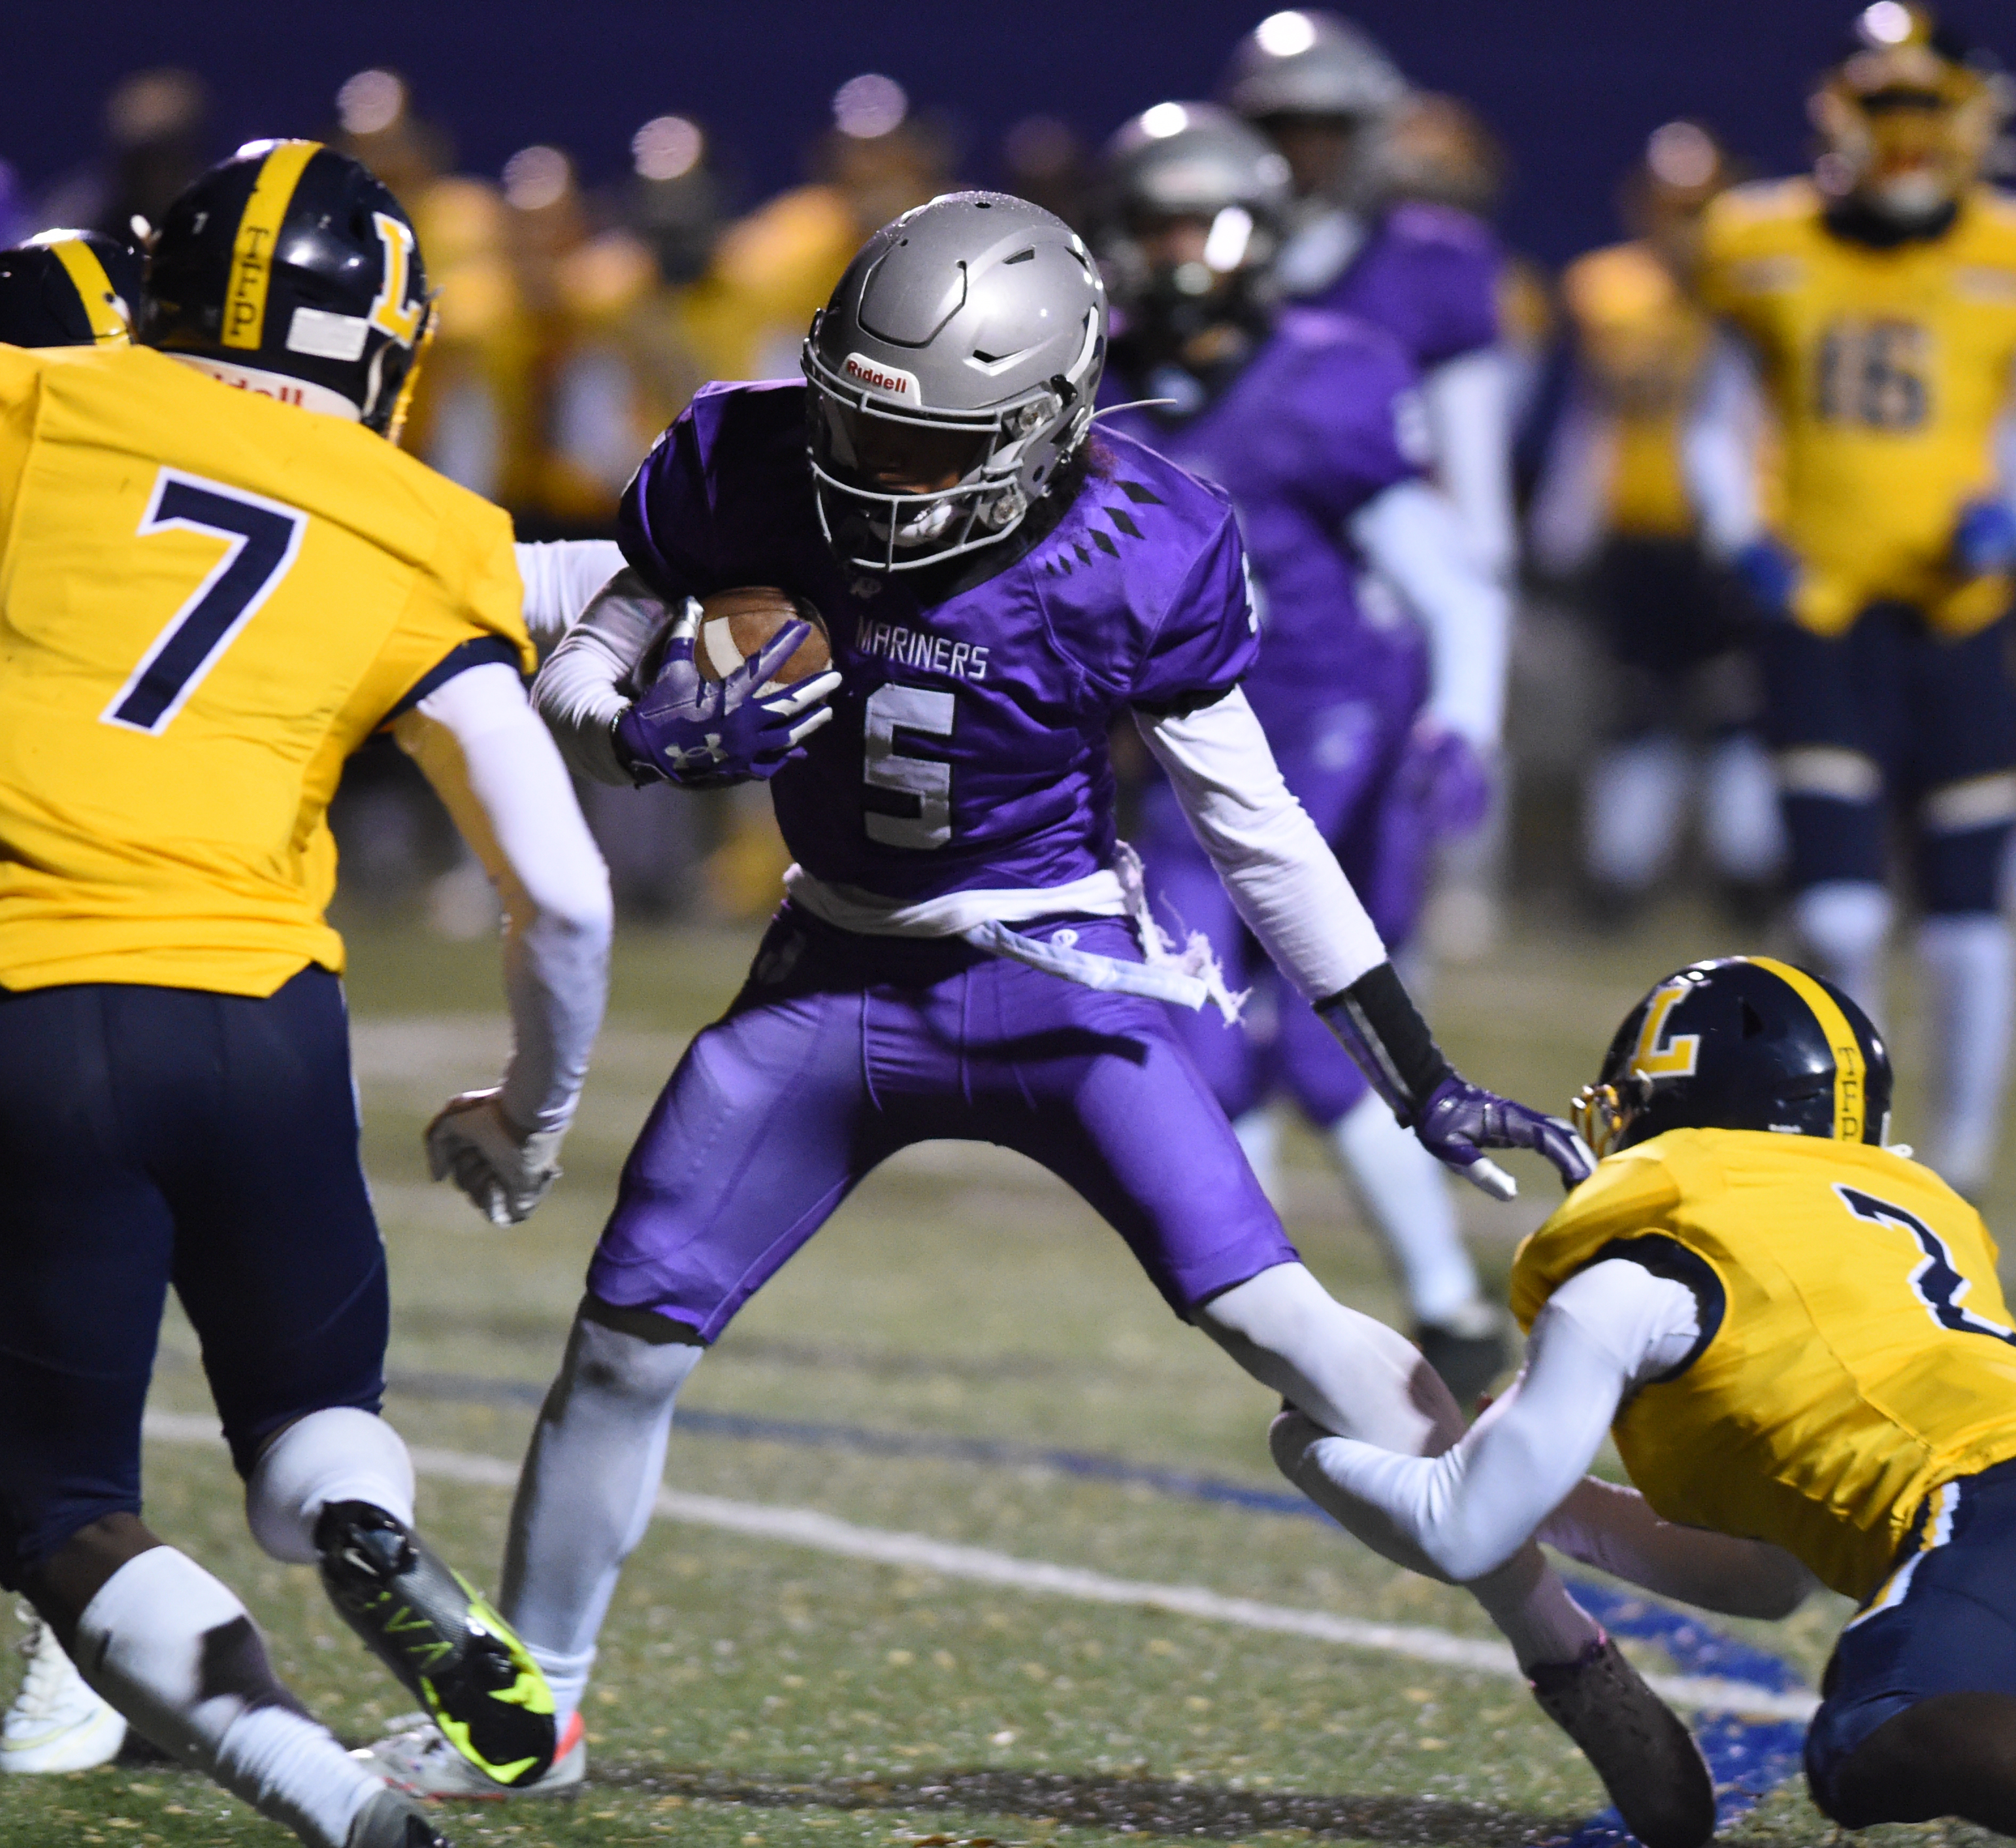 High school football preview: New Jersey boasts several undefeated